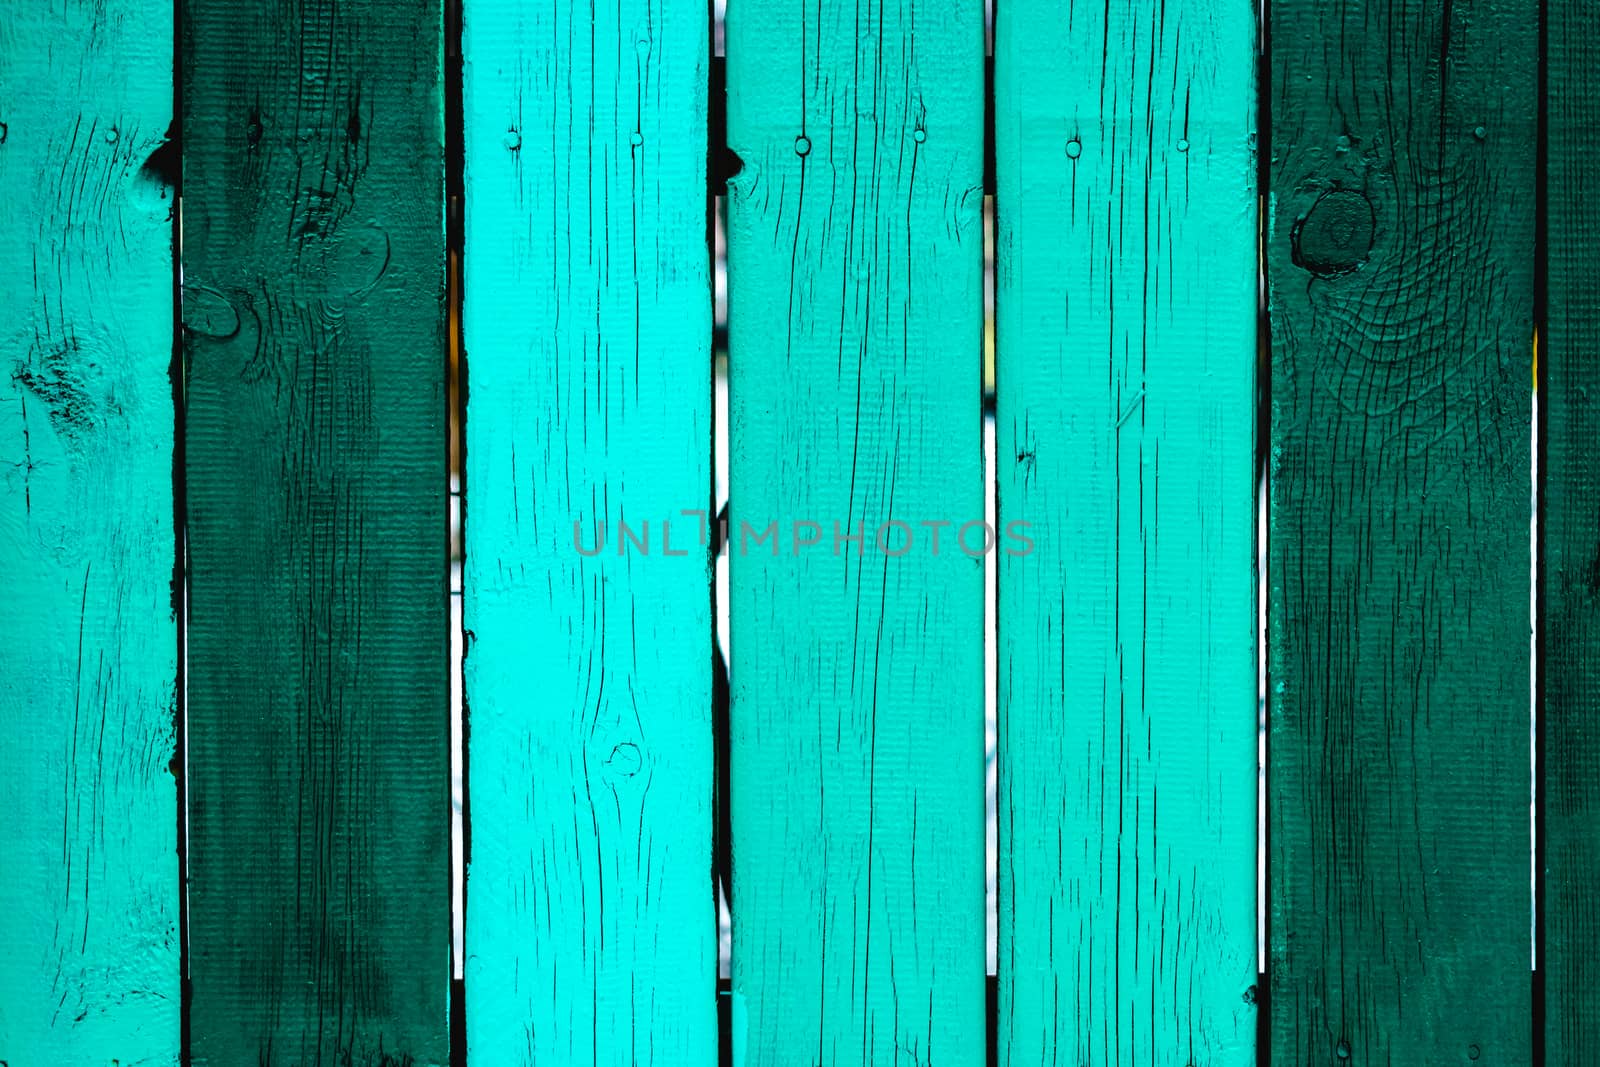 painted fence of wooden boards